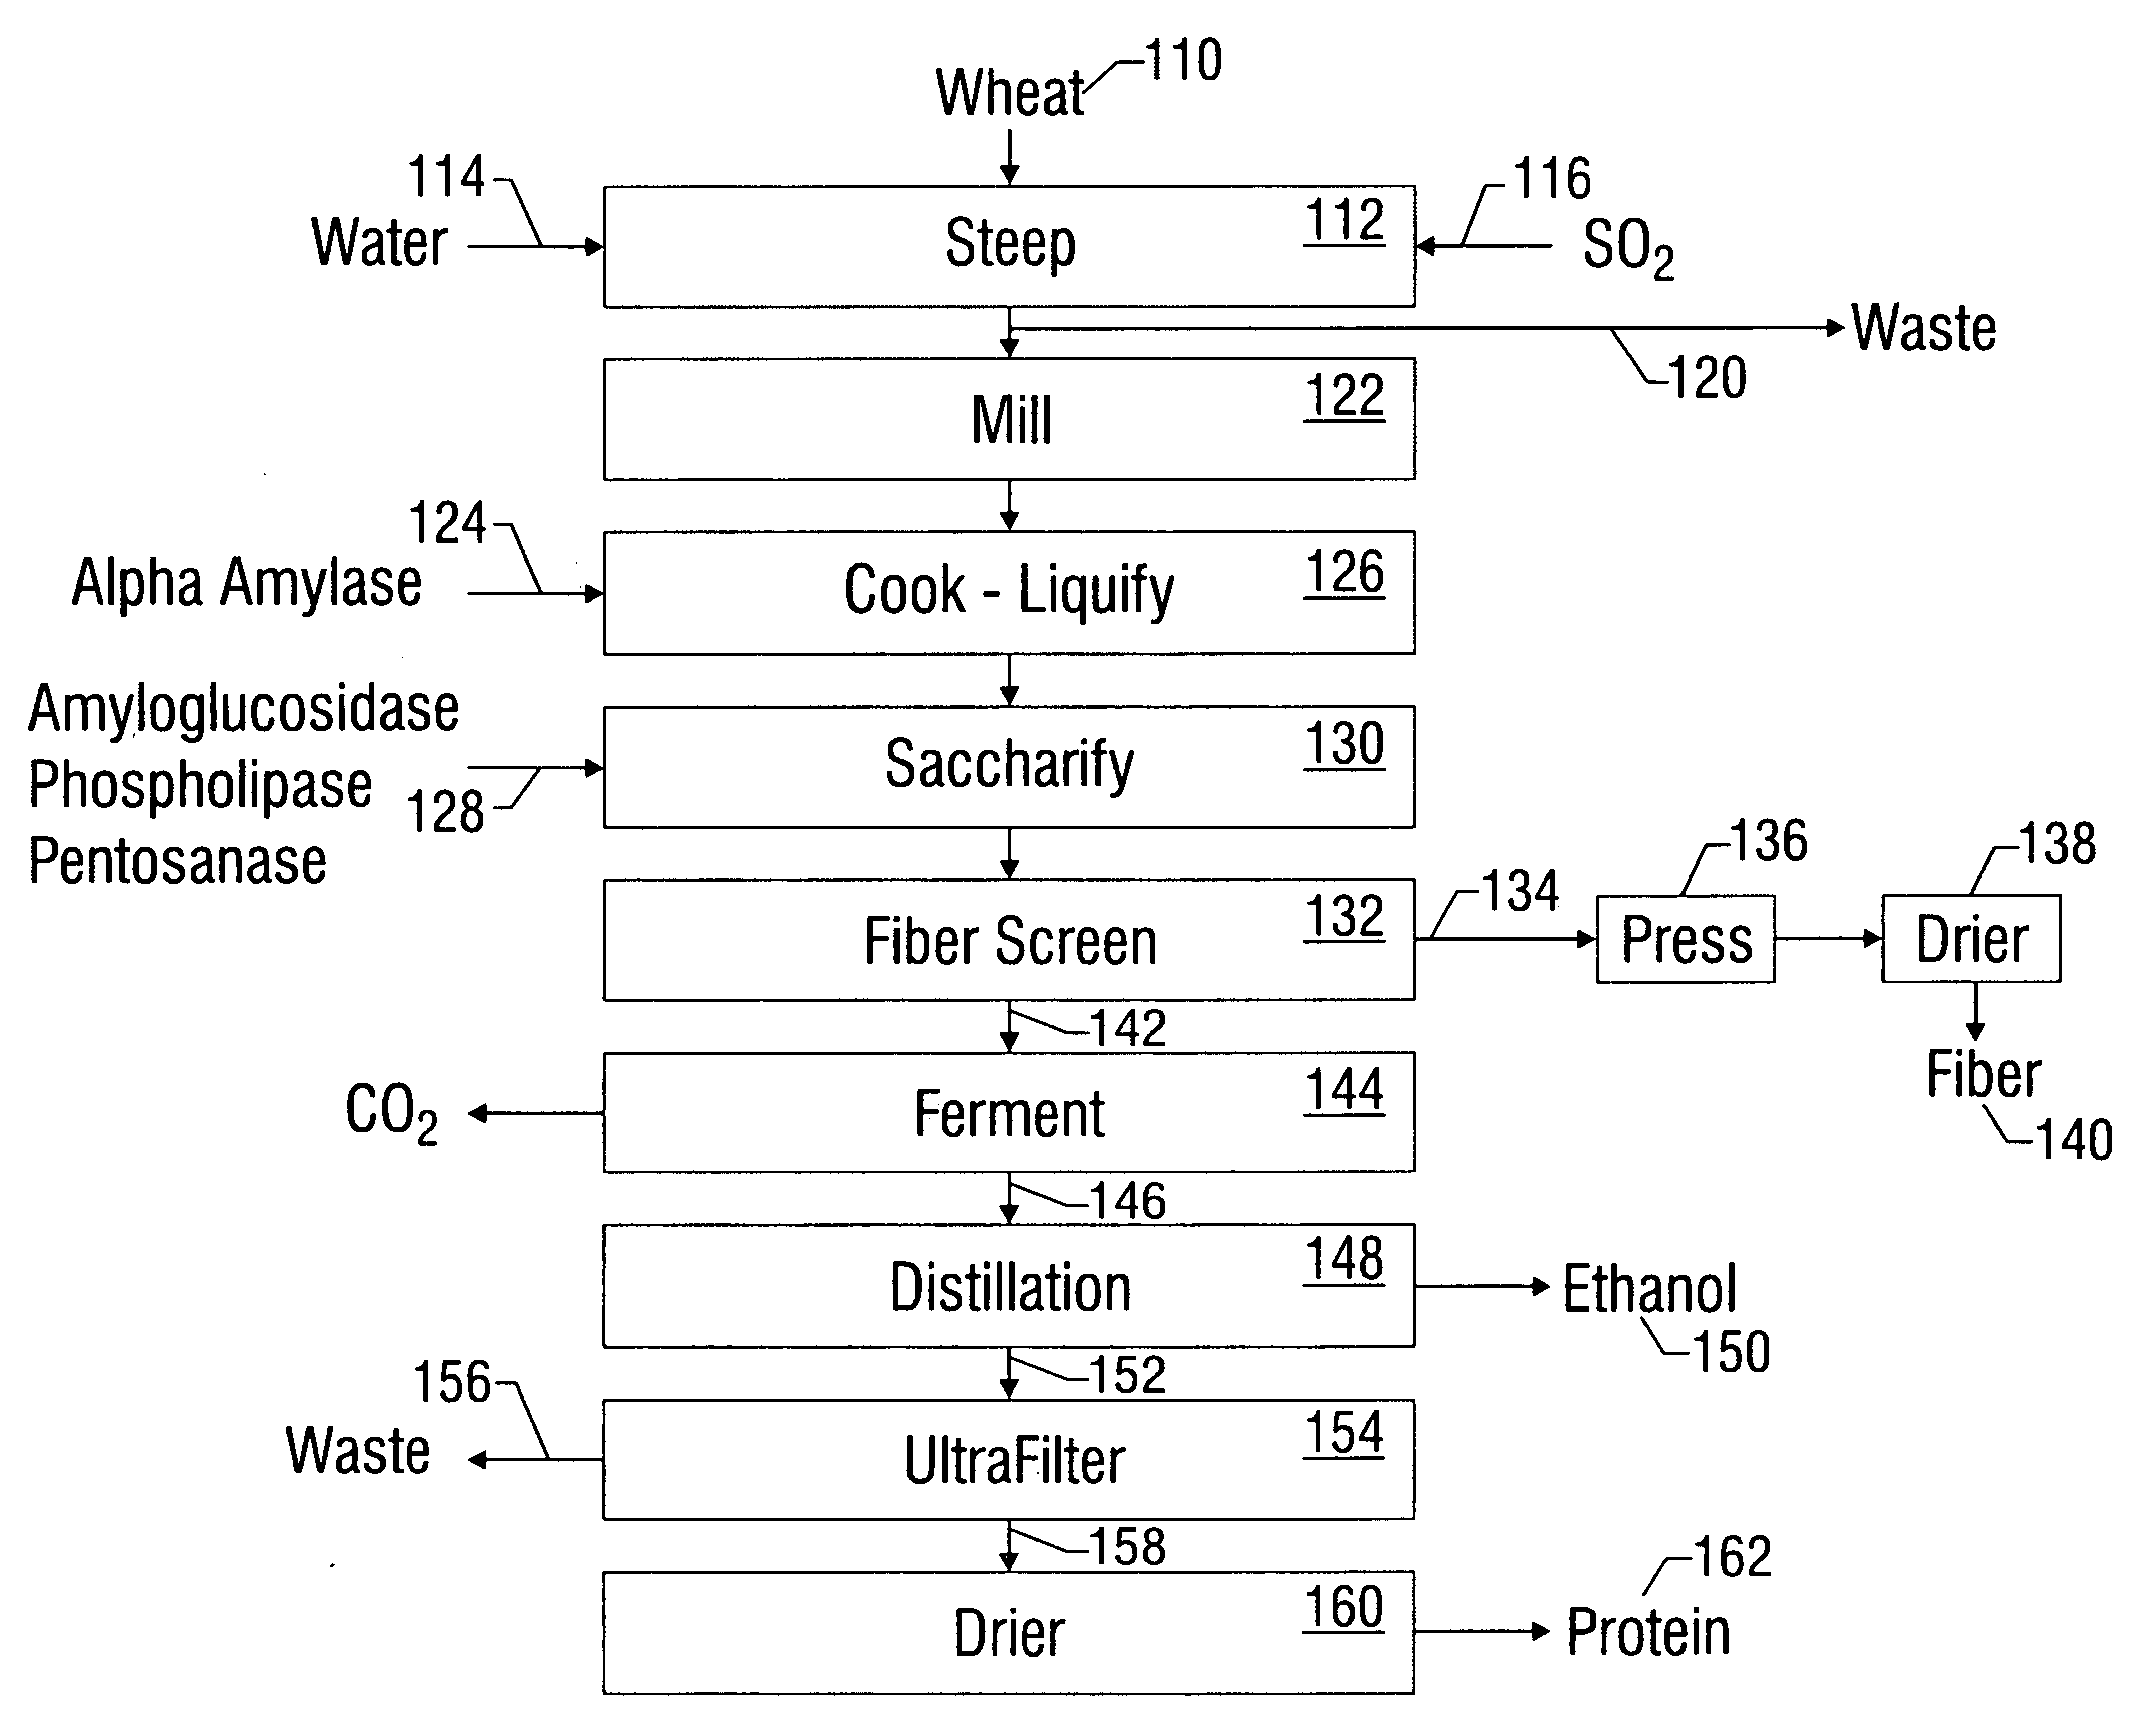 Grain wet milling process for producing ethanol